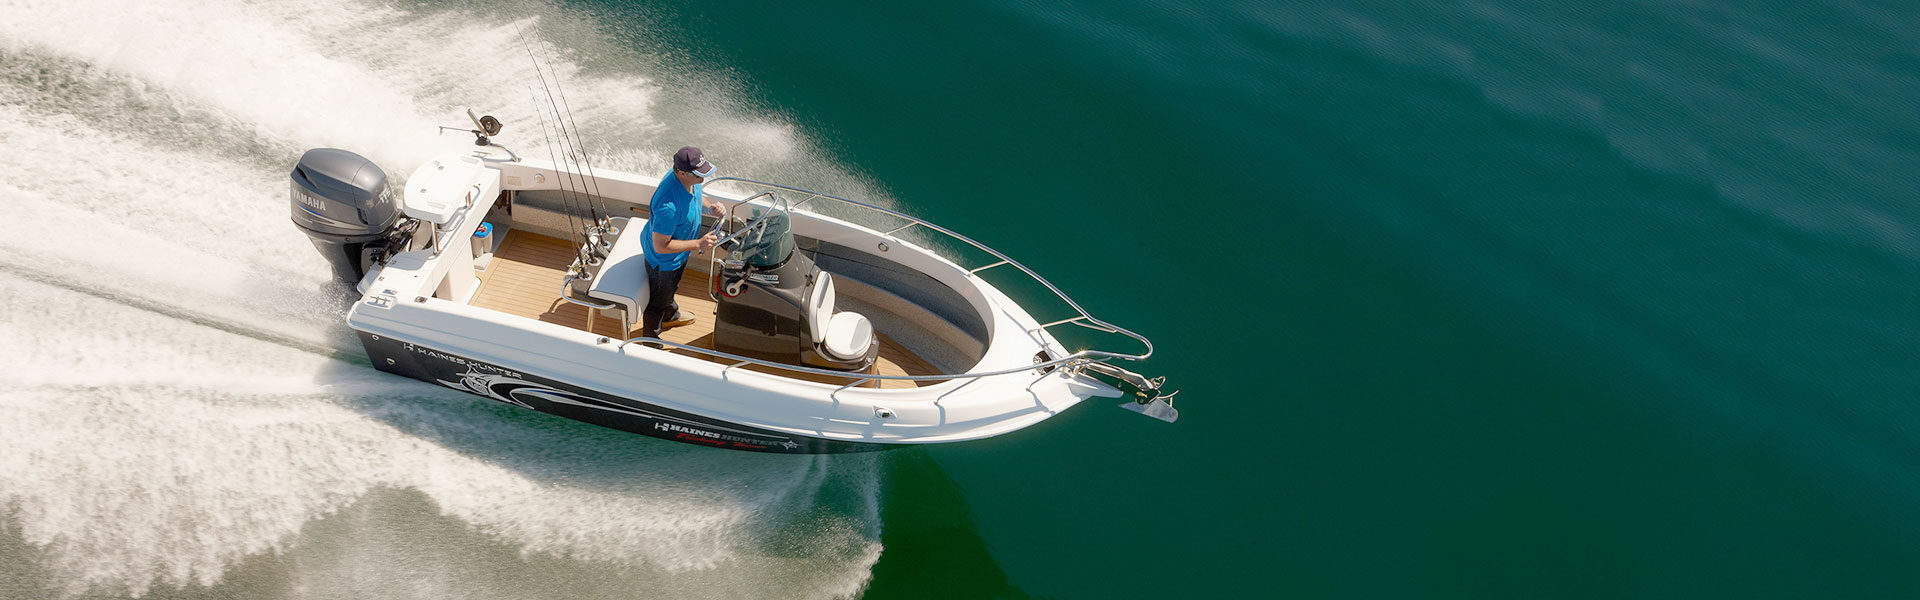 Blue Water Magazine Reviews The 760r